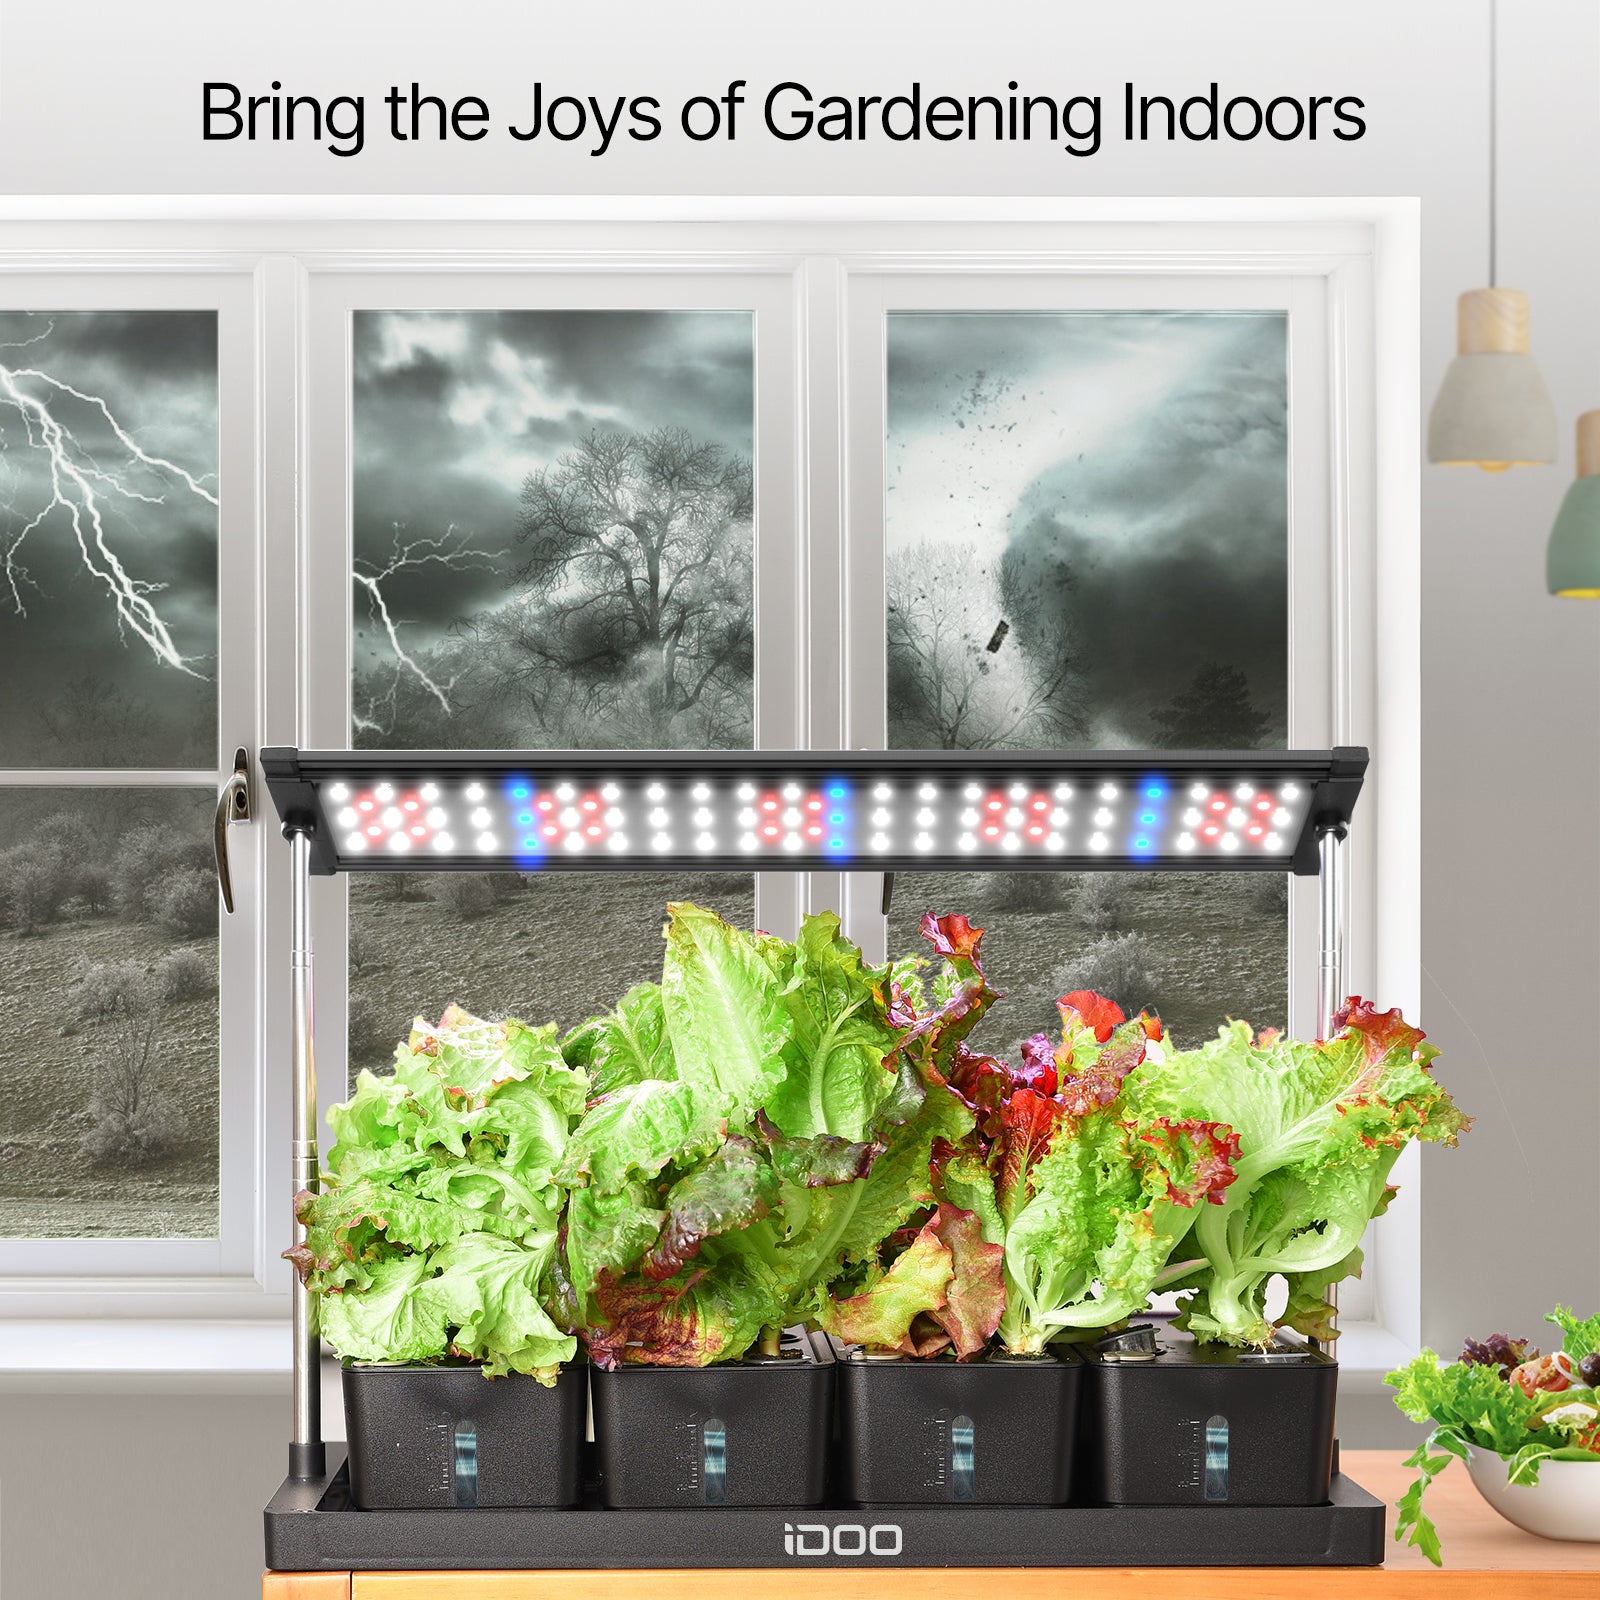 iDOO 20 Pods Indoor Herb Garden Kit - 20 Pods _wf_cus Best Seller Best Seller_CA fathersday Hydroponic Growing System by idoogroup